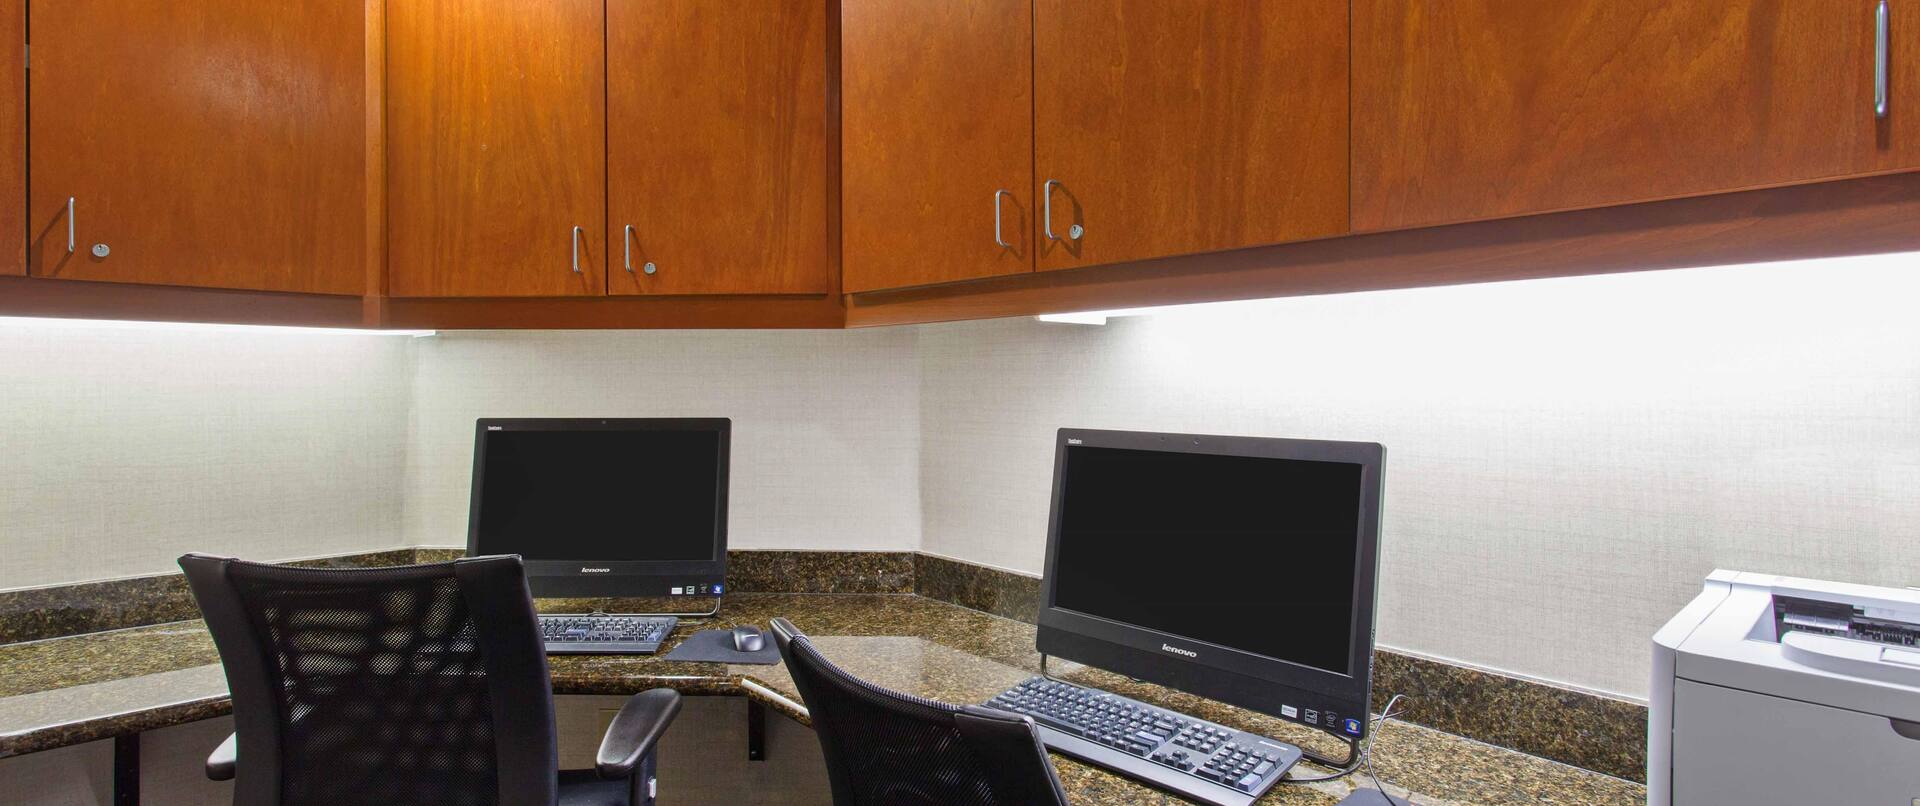 Business Center with monitors